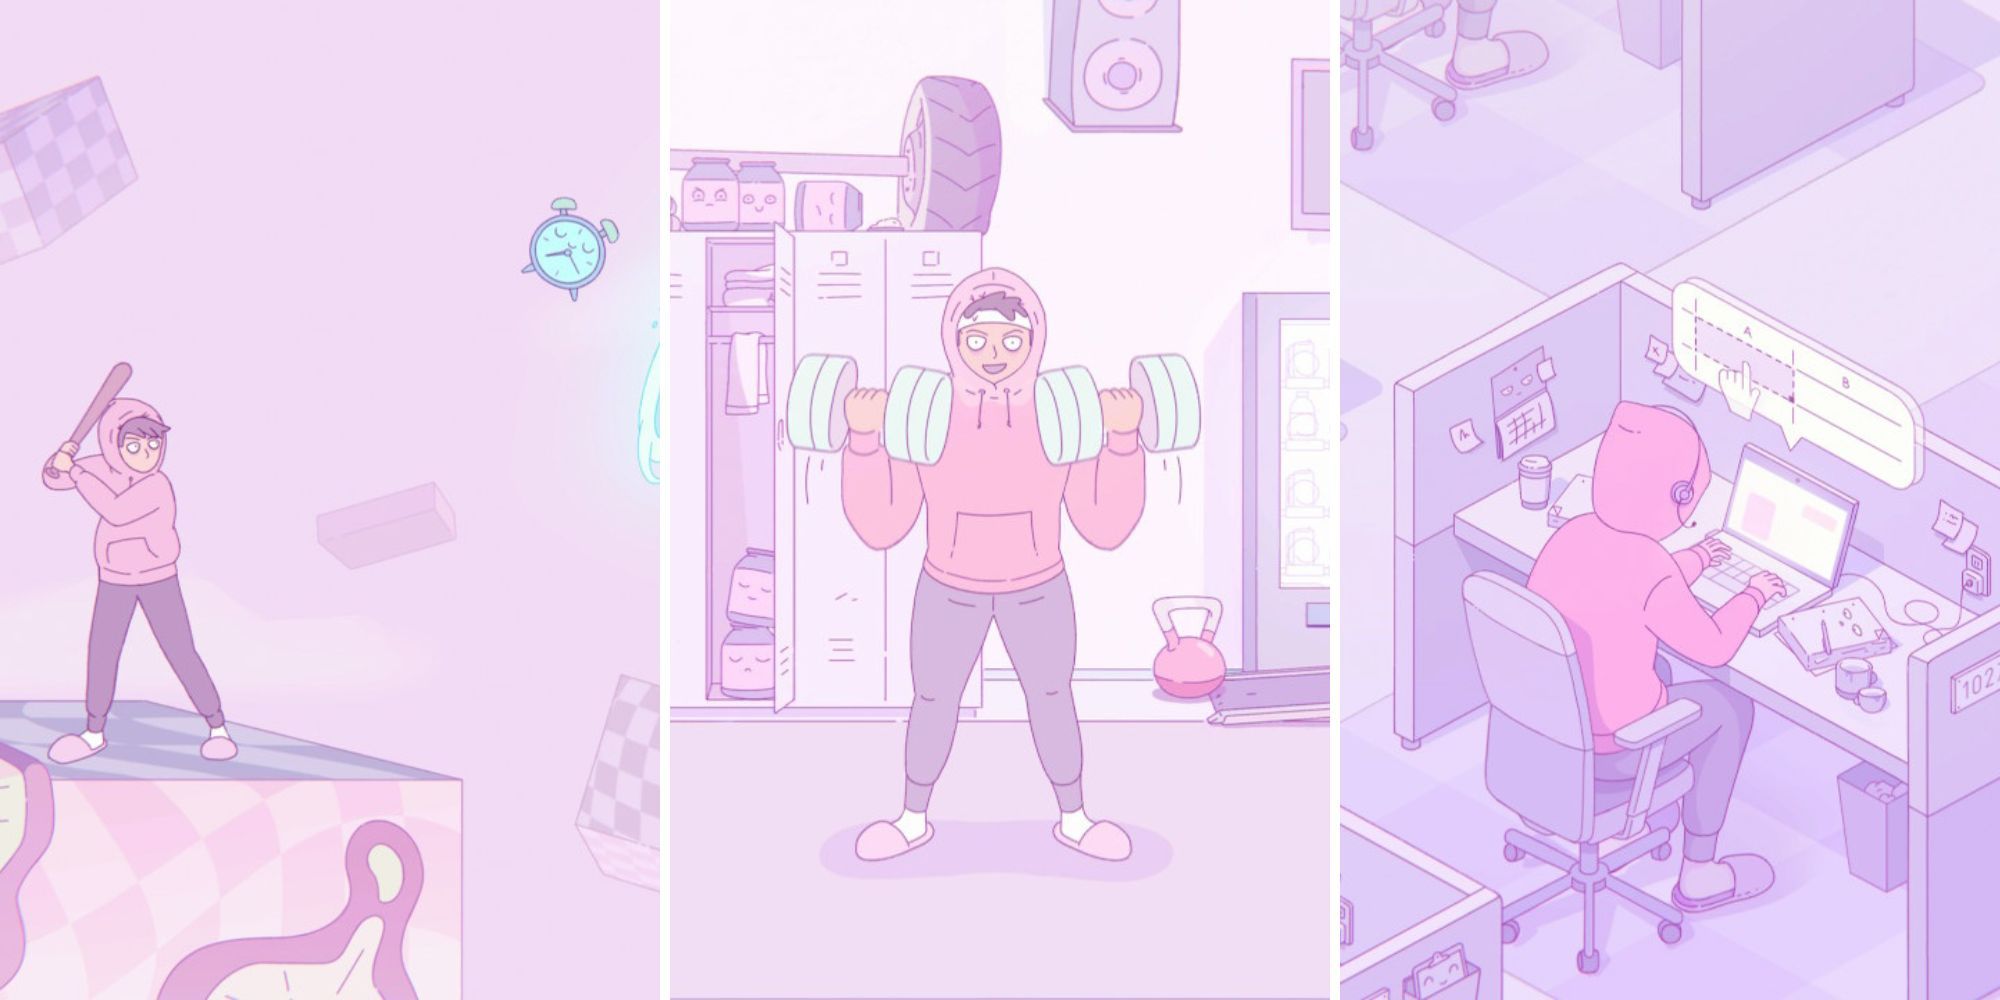 Melatonin: Split image showing the protagonist swinging a bat at a clock, lifting weights, and working at a desk